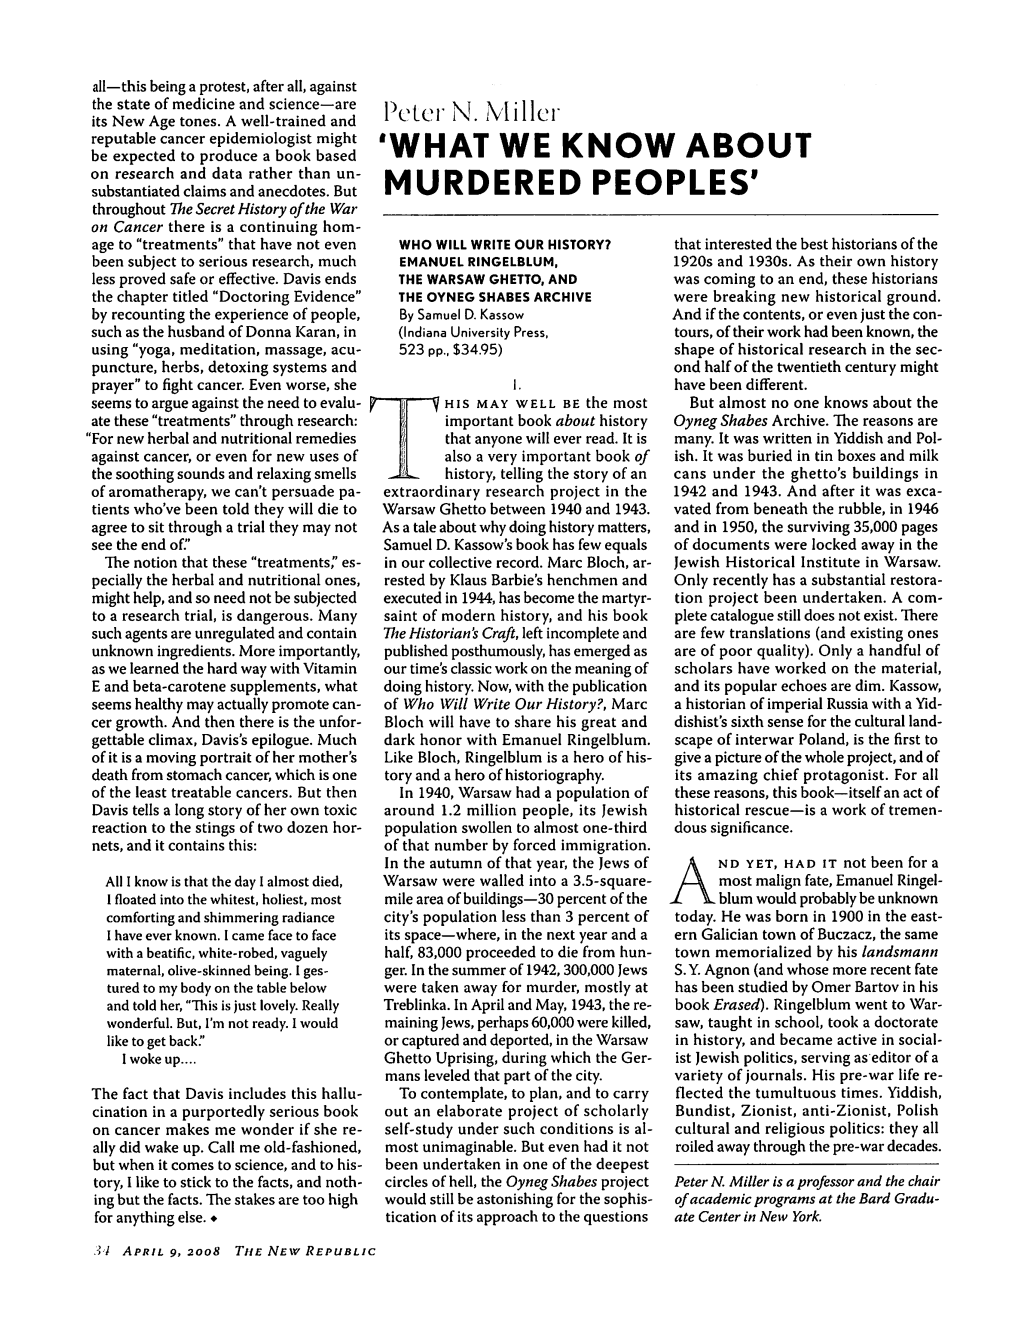 'What We Know About Murdered Peoples'